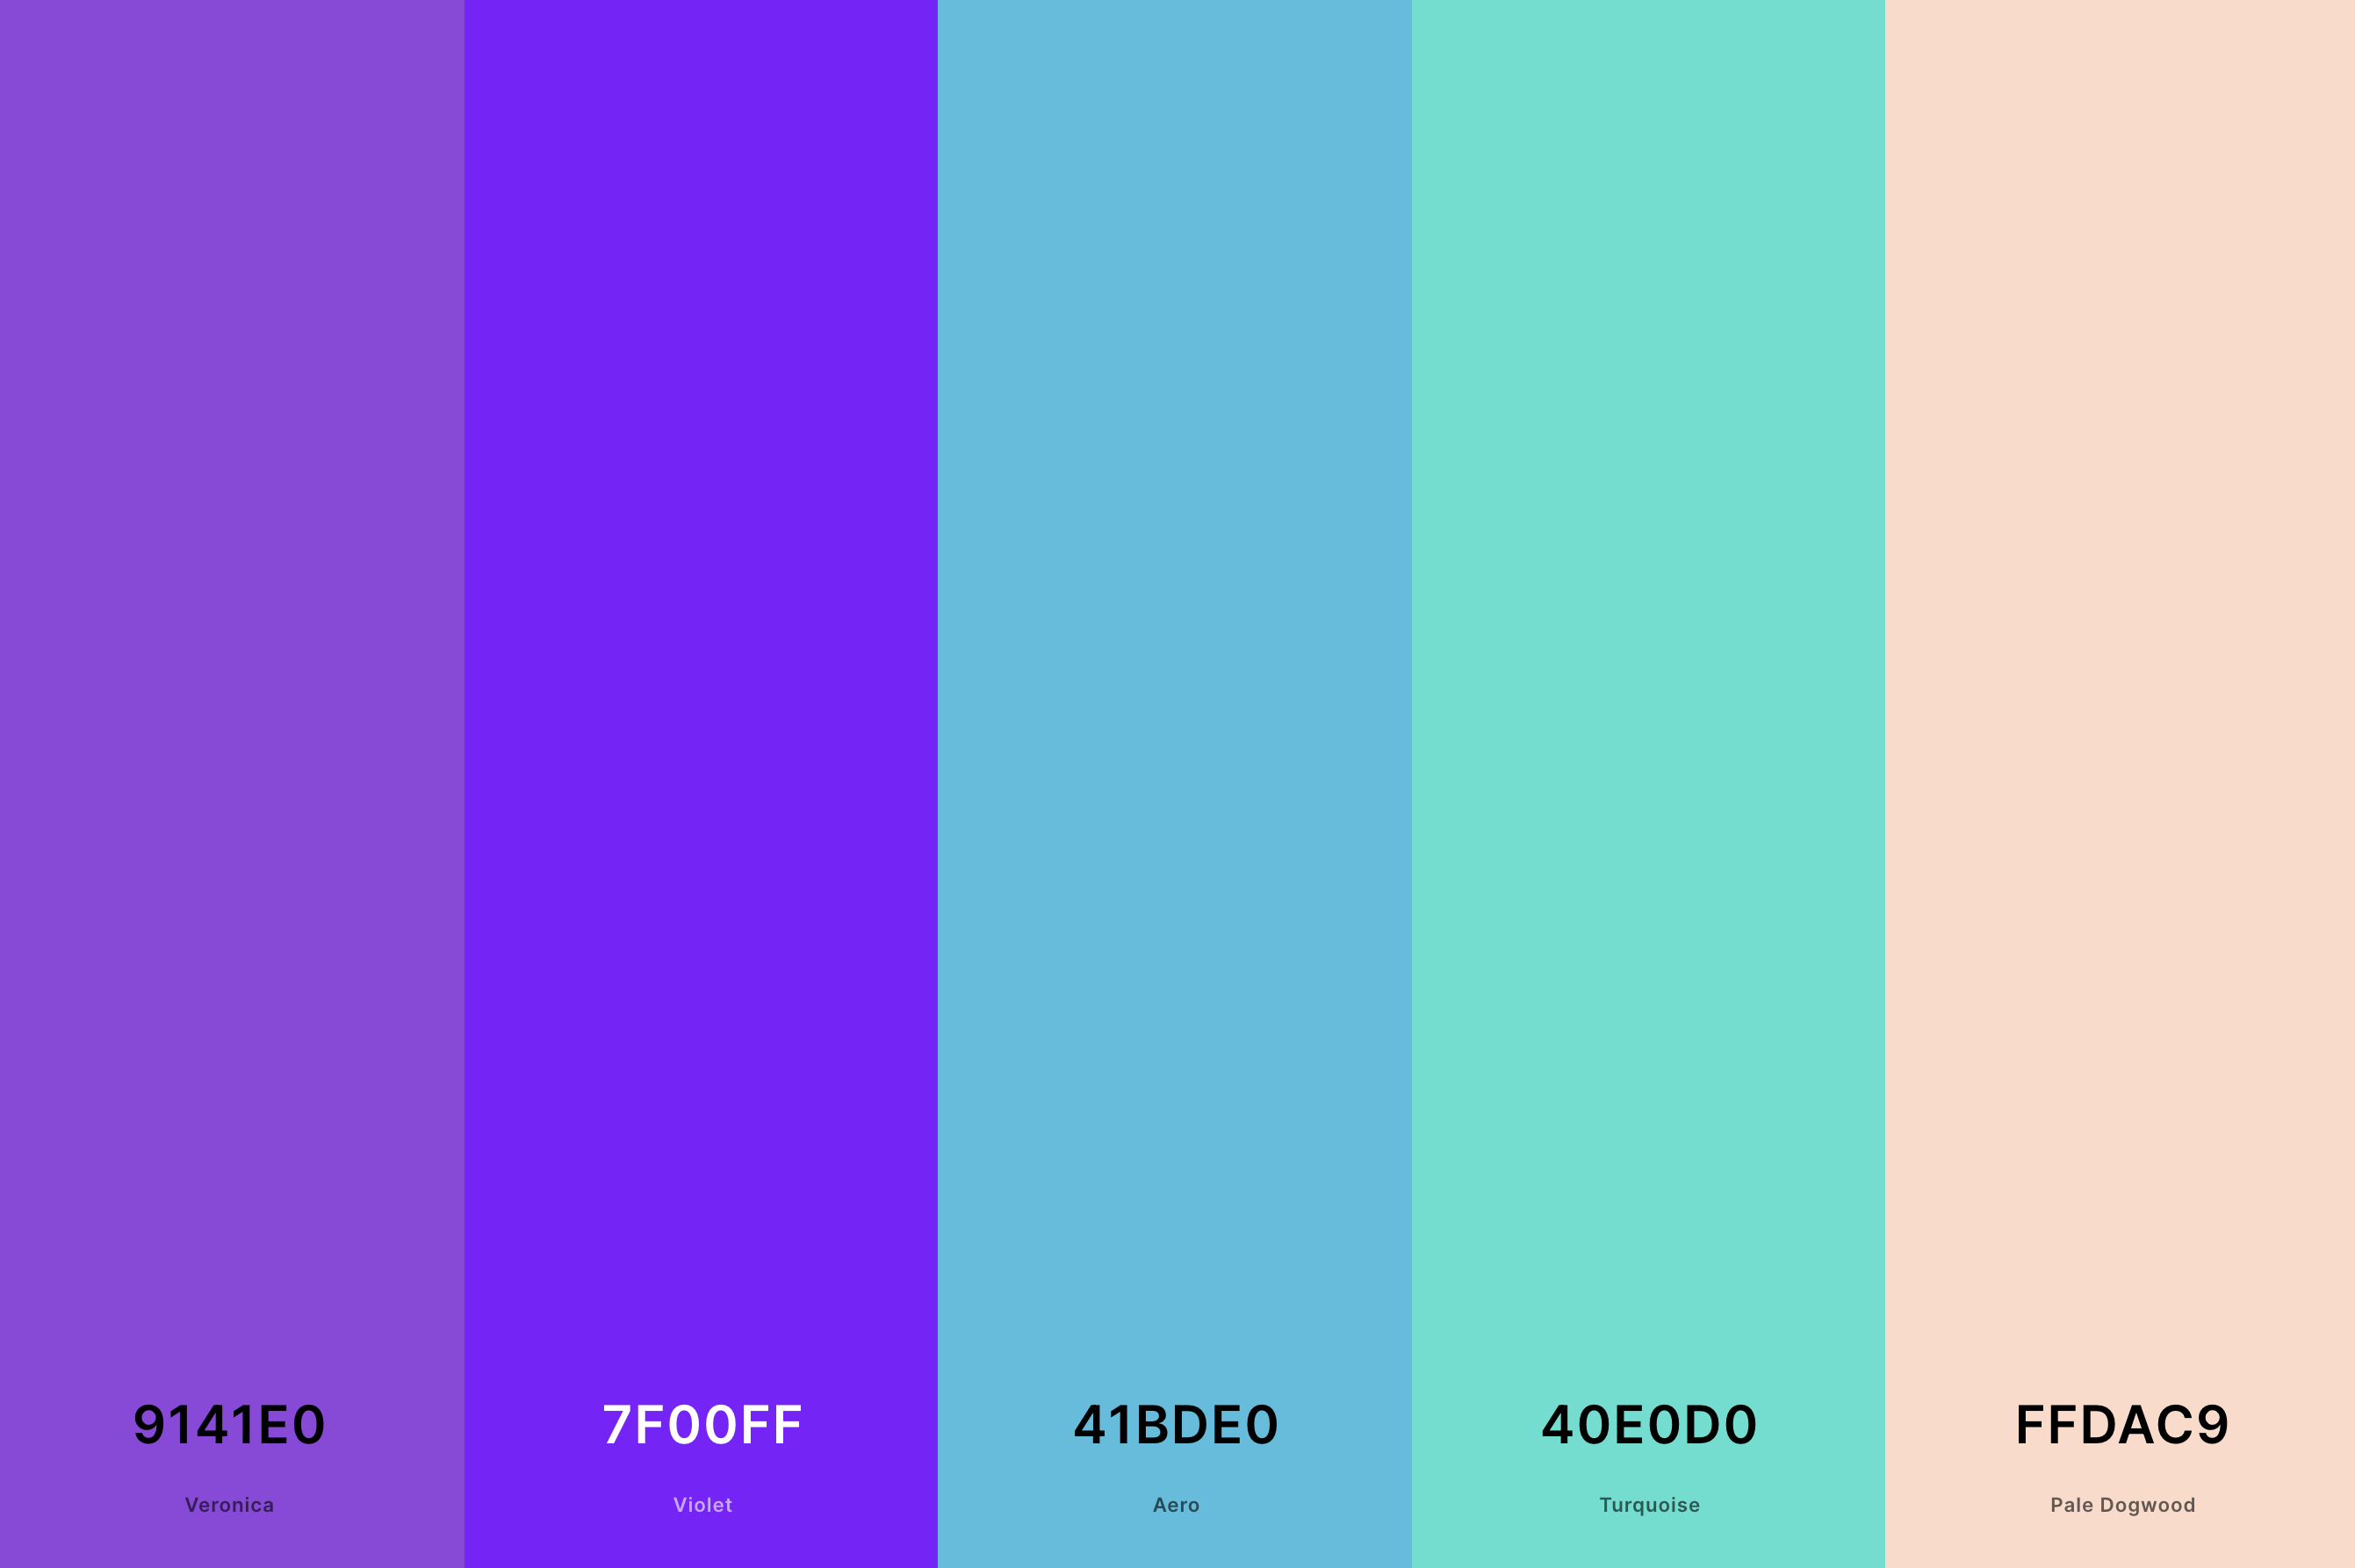 23. Violet And Turquoise Color Palette Color Palette with Veronica (Hex #9141E0) + Violet (Hex #7F00FF) + Aero (Hex #41BDE0) + Turquoise (Hex #40E0D0) + Pale Dogwood (Hex #FFDAC9) Color Palette with Hex Codes